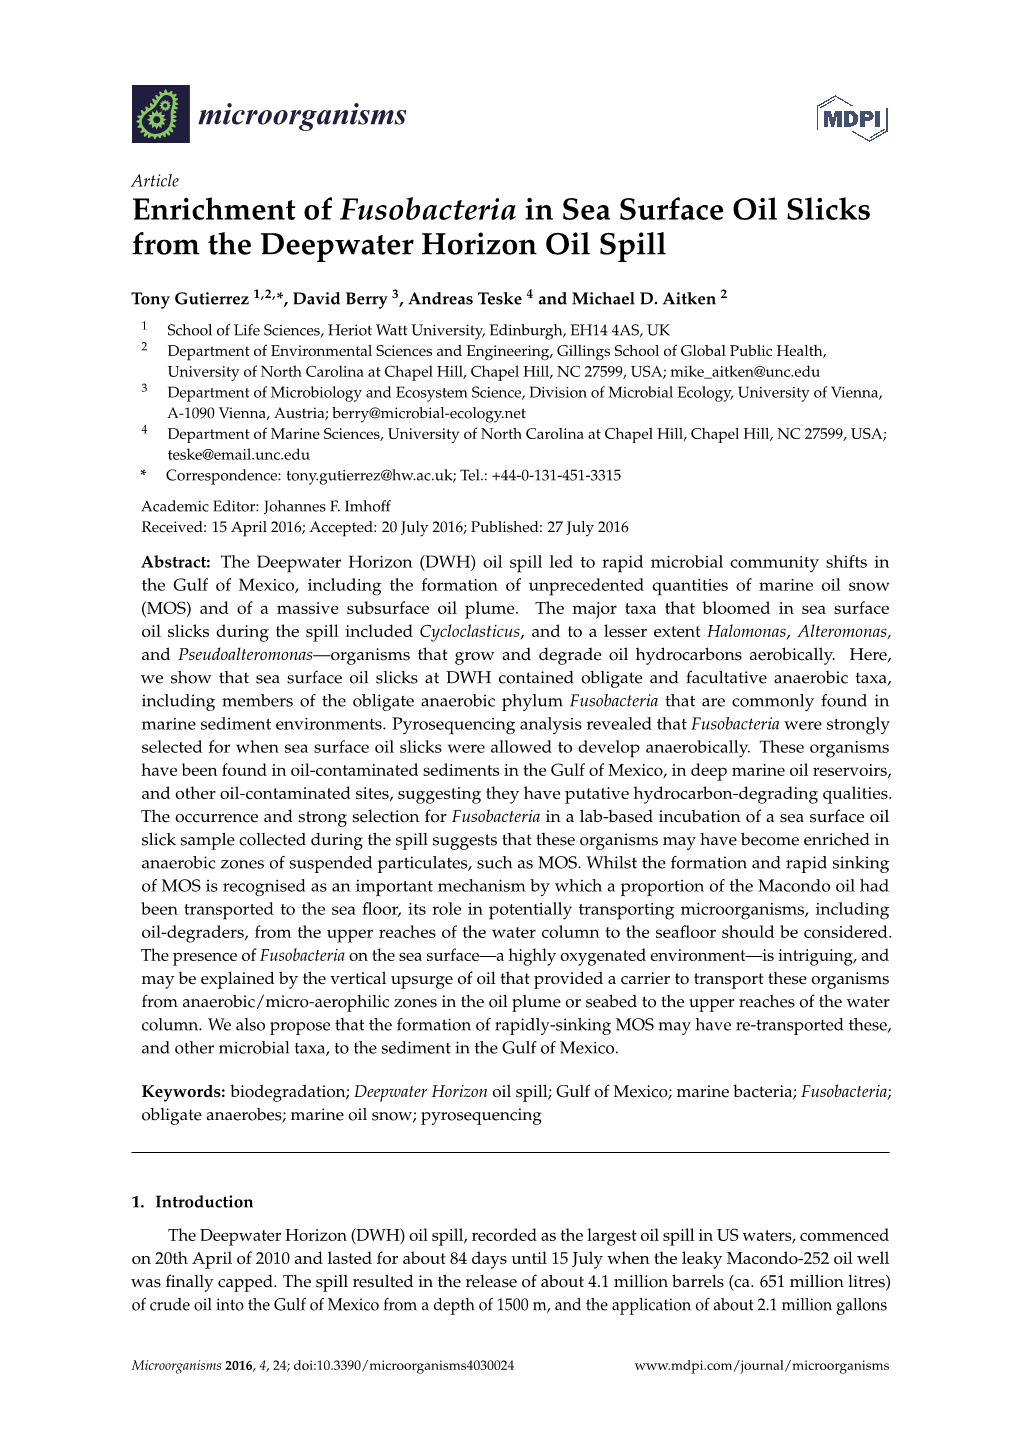 Enrichment of Fusobacteria in Sea Surface Oil Slicks from the Deepwater Horizon Oil Spill